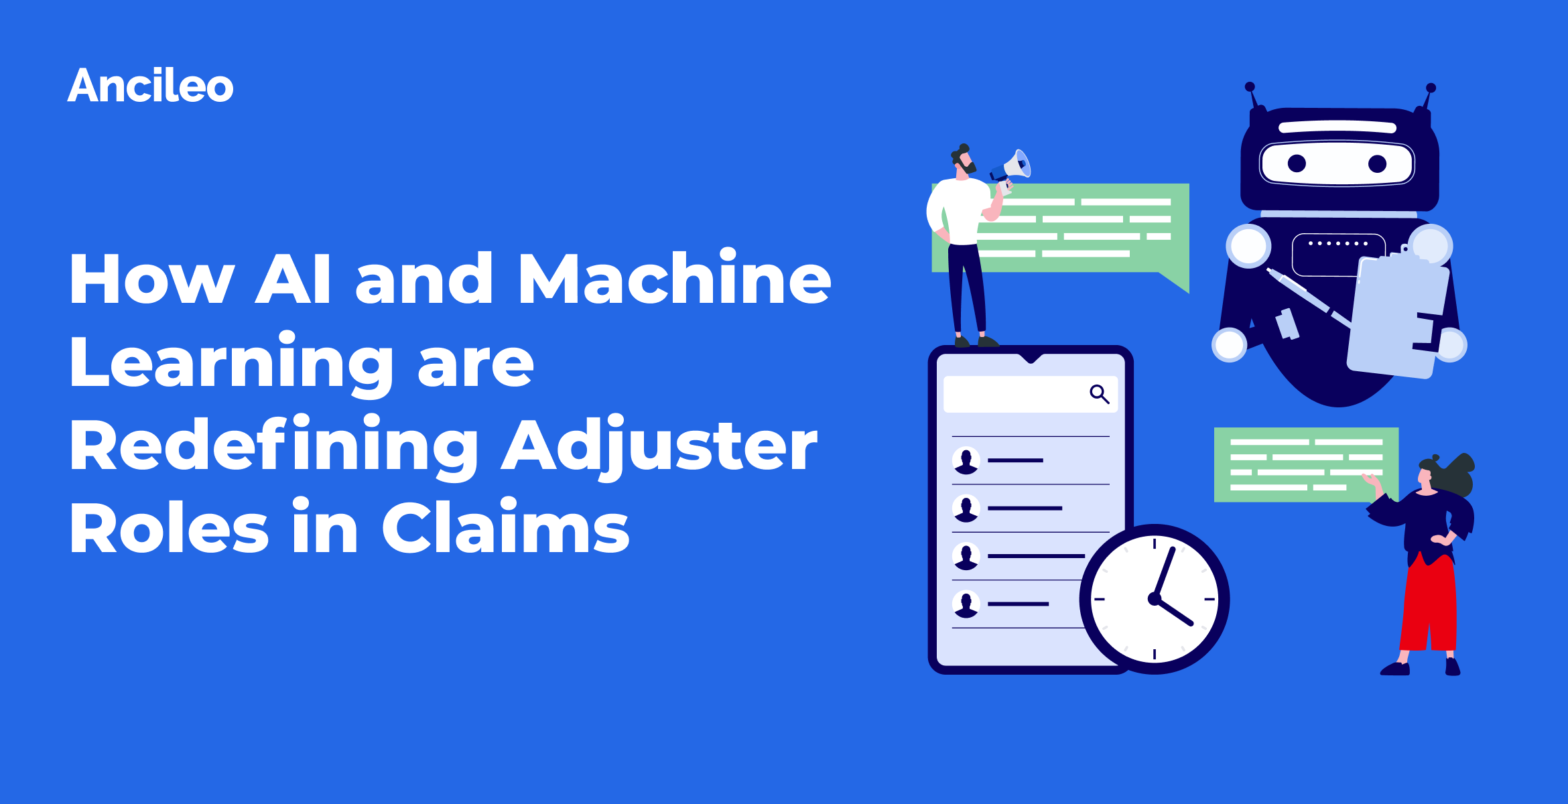 How AI and Machine Learning are Redefining Adjuster Roles in Claims